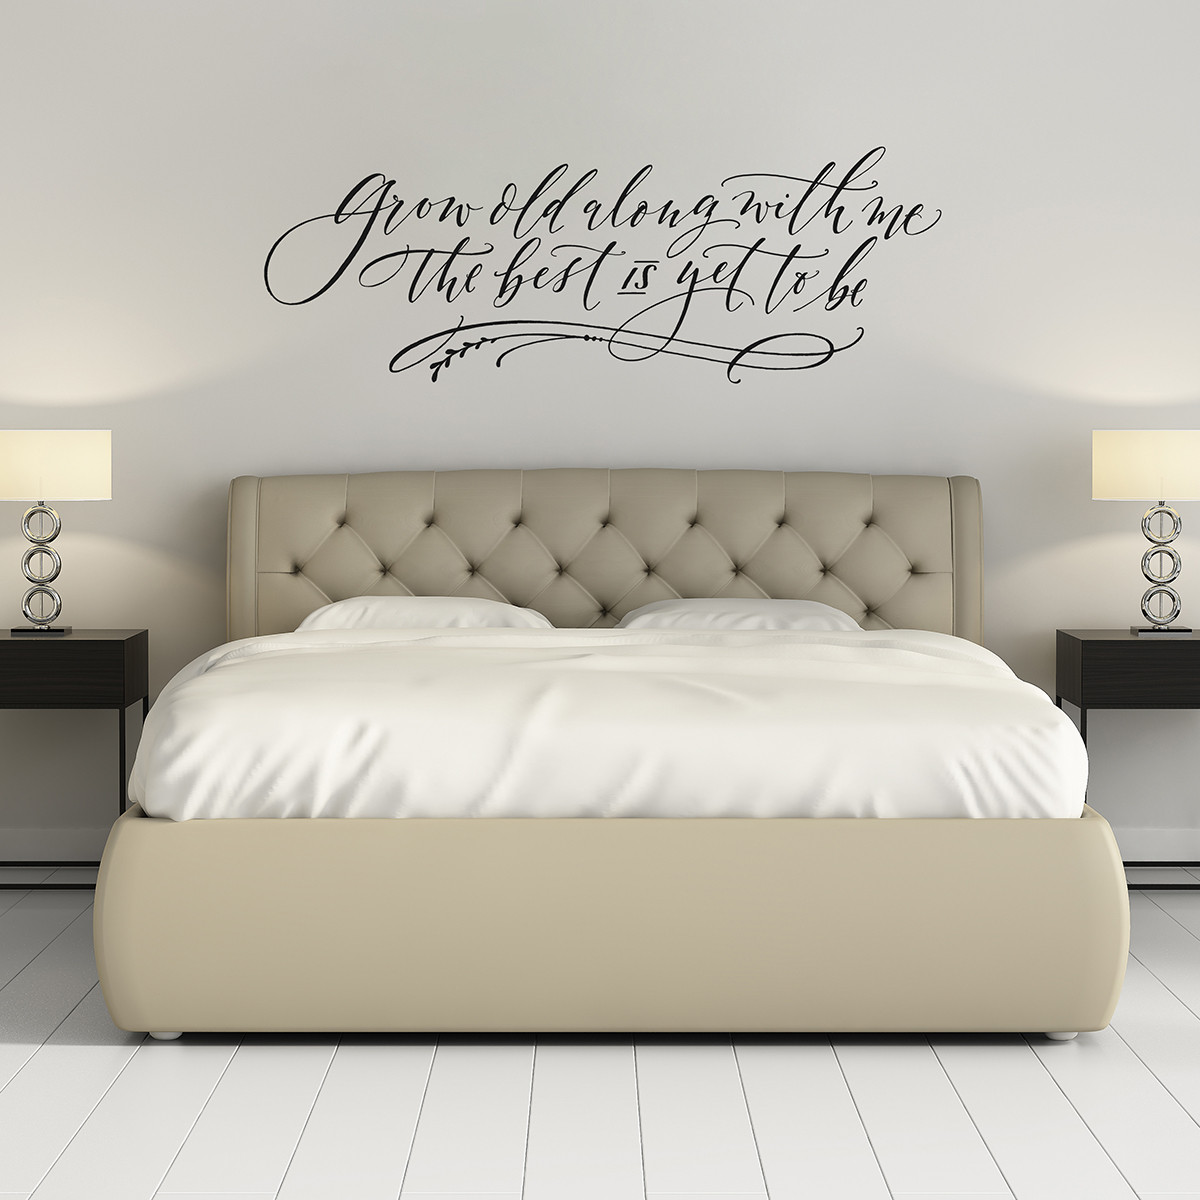 Grow Old Along With Me Wall Decals For Bedroom Love Wall Quotes